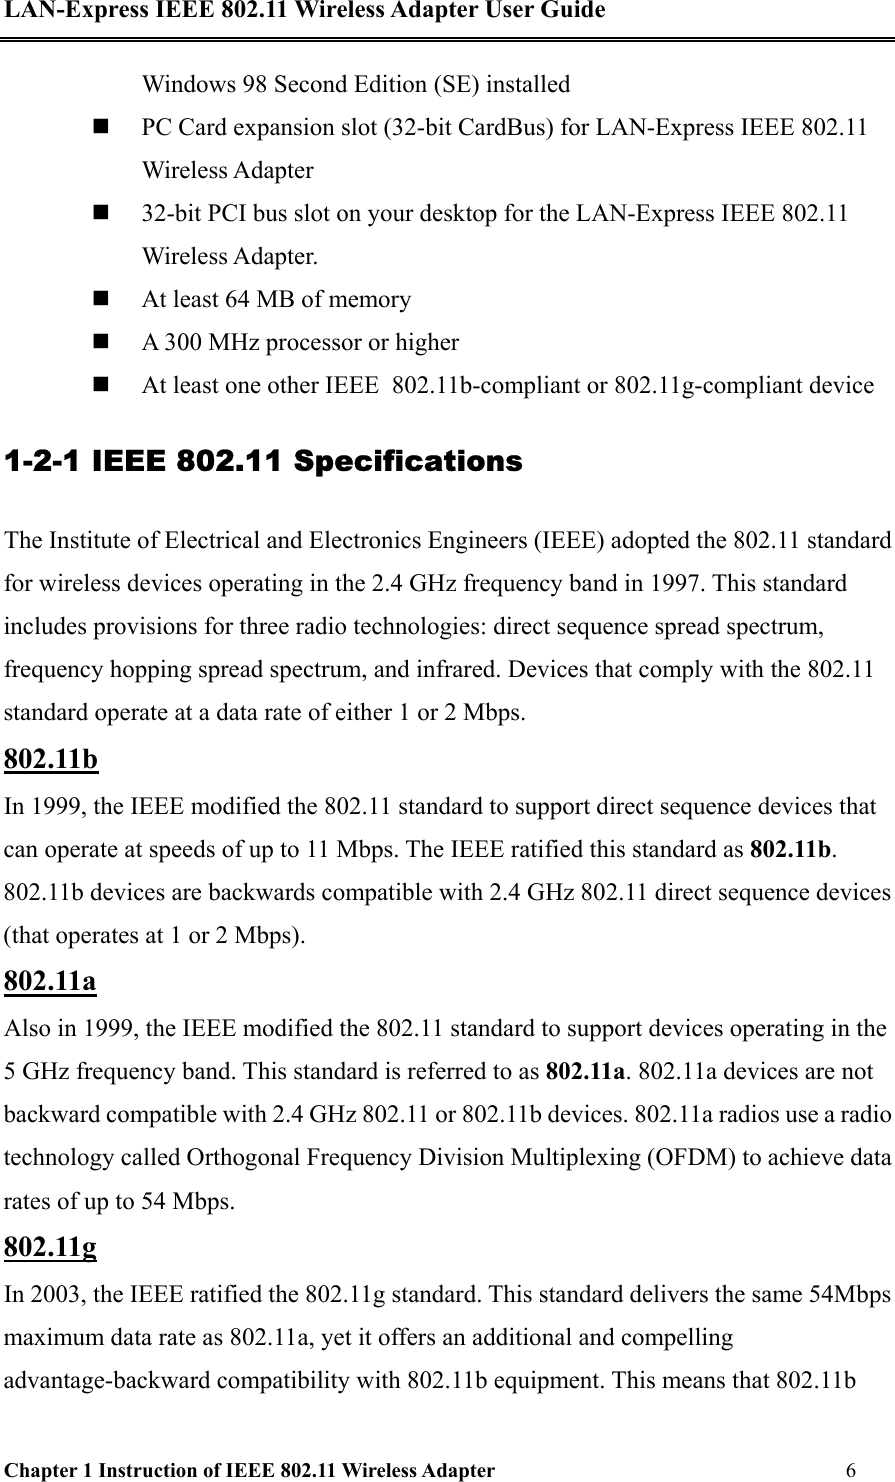 LAN-Express IEEE 802.11 Wireless Adapter User Guide Chapter 1 Instruction of IEEE 802.11 Wireless Adapter       6   Windows 98 Second Edition (SE) installed   PC Card expansion slot (32-bit CardBus) for LAN-Express IEEE 802.11 Wireless Adapter   32-bit PCI bus slot on your desktop for the LAN-Express IEEE 802.11 Wireless Adapter.    At least 64 MB of memory   A 300 MHz processor or higher   At least one other IEEE  802.11b-compliant or 802.11g-compliant device 1-2-1 IEEE 802.11 Specifications The Institute of Electrical and Electronics Engineers (IEEE) adopted the 802.11 standard for wireless devices operating in the 2.4 GHz frequency band in 1997. This standard includes provisions for three radio technologies: direct sequence spread spectrum, frequency hopping spread spectrum, and infrared. Devices that comply with the 802.11 standard operate at a data rate of either 1 or 2 Mbps. 802.11b In 1999, the IEEE modified the 802.11 standard to support direct sequence devices that can operate at speeds of up to 11 Mbps. The IEEE ratified this standard as 802.11b. 802.11b devices are backwards compatible with 2.4 GHz 802.11 direct sequence devices (that operates at 1 or 2 Mbps). 802.11a Also in 1999, the IEEE modified the 802.11 standard to support devices operating in the 5 GHz frequency band. This standard is referred to as 802.11a. 802.11a devices are not backward compatible with 2.4 GHz 802.11 or 802.11b devices. 802.11a radios use a radio technology called Orthogonal Frequency Division Multiplexing (OFDM) to achieve data rates of up to 54 Mbps.  802.11g In 2003, the IEEE ratified the 802.11g standard. This standard delivers the same 54Mbps maximum data rate as 802.11a, yet it offers an additional and compelling advantage-backward compatibility with 802.11b equipment. This means that 802.11b 